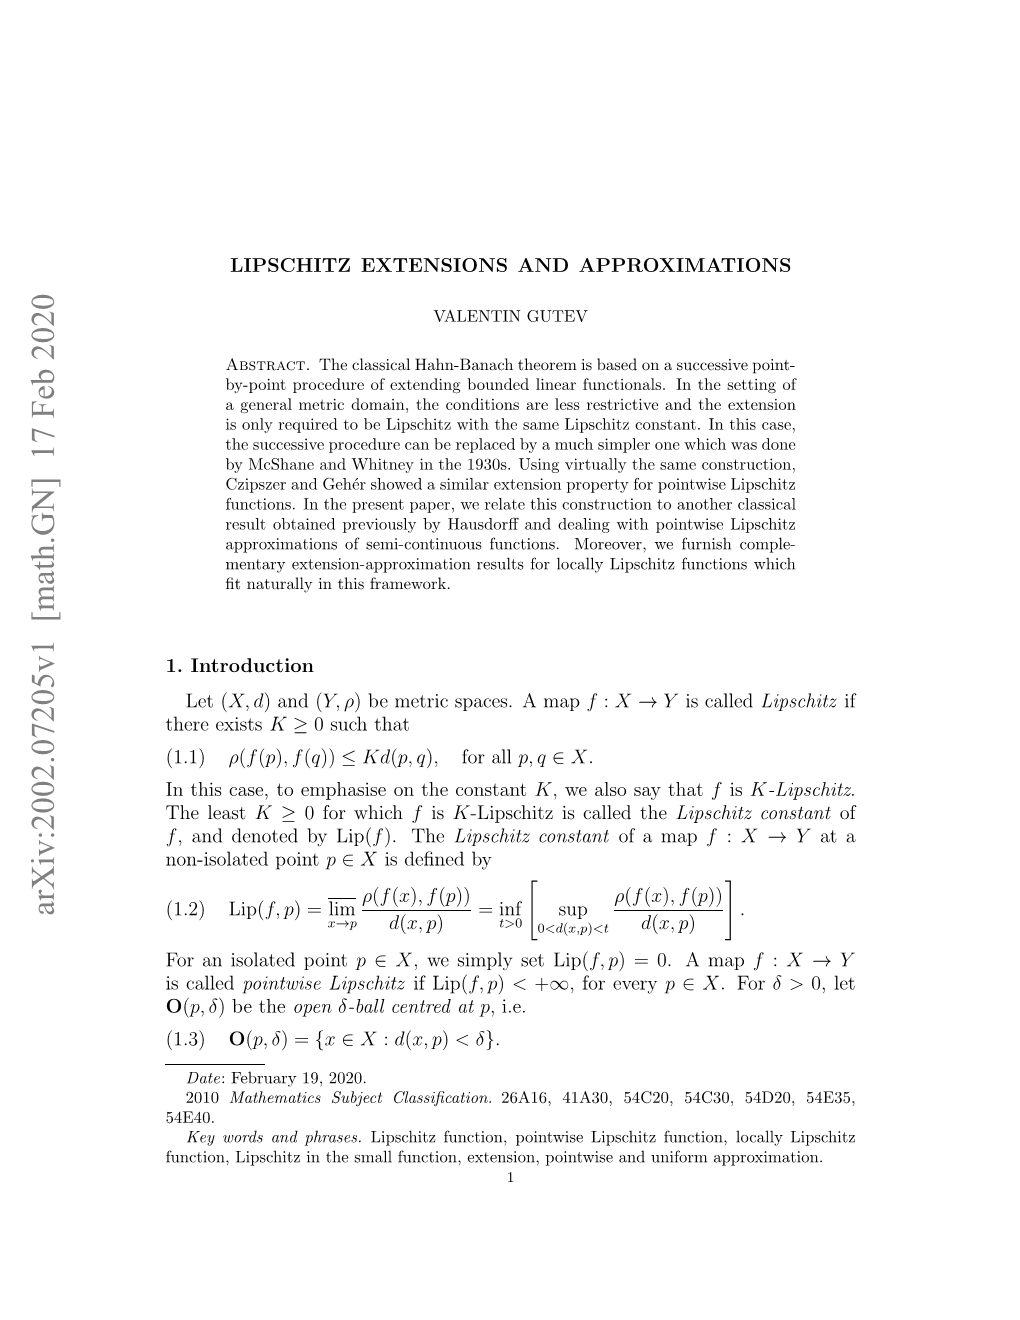 Lipschitz Extensions and Approximations 3